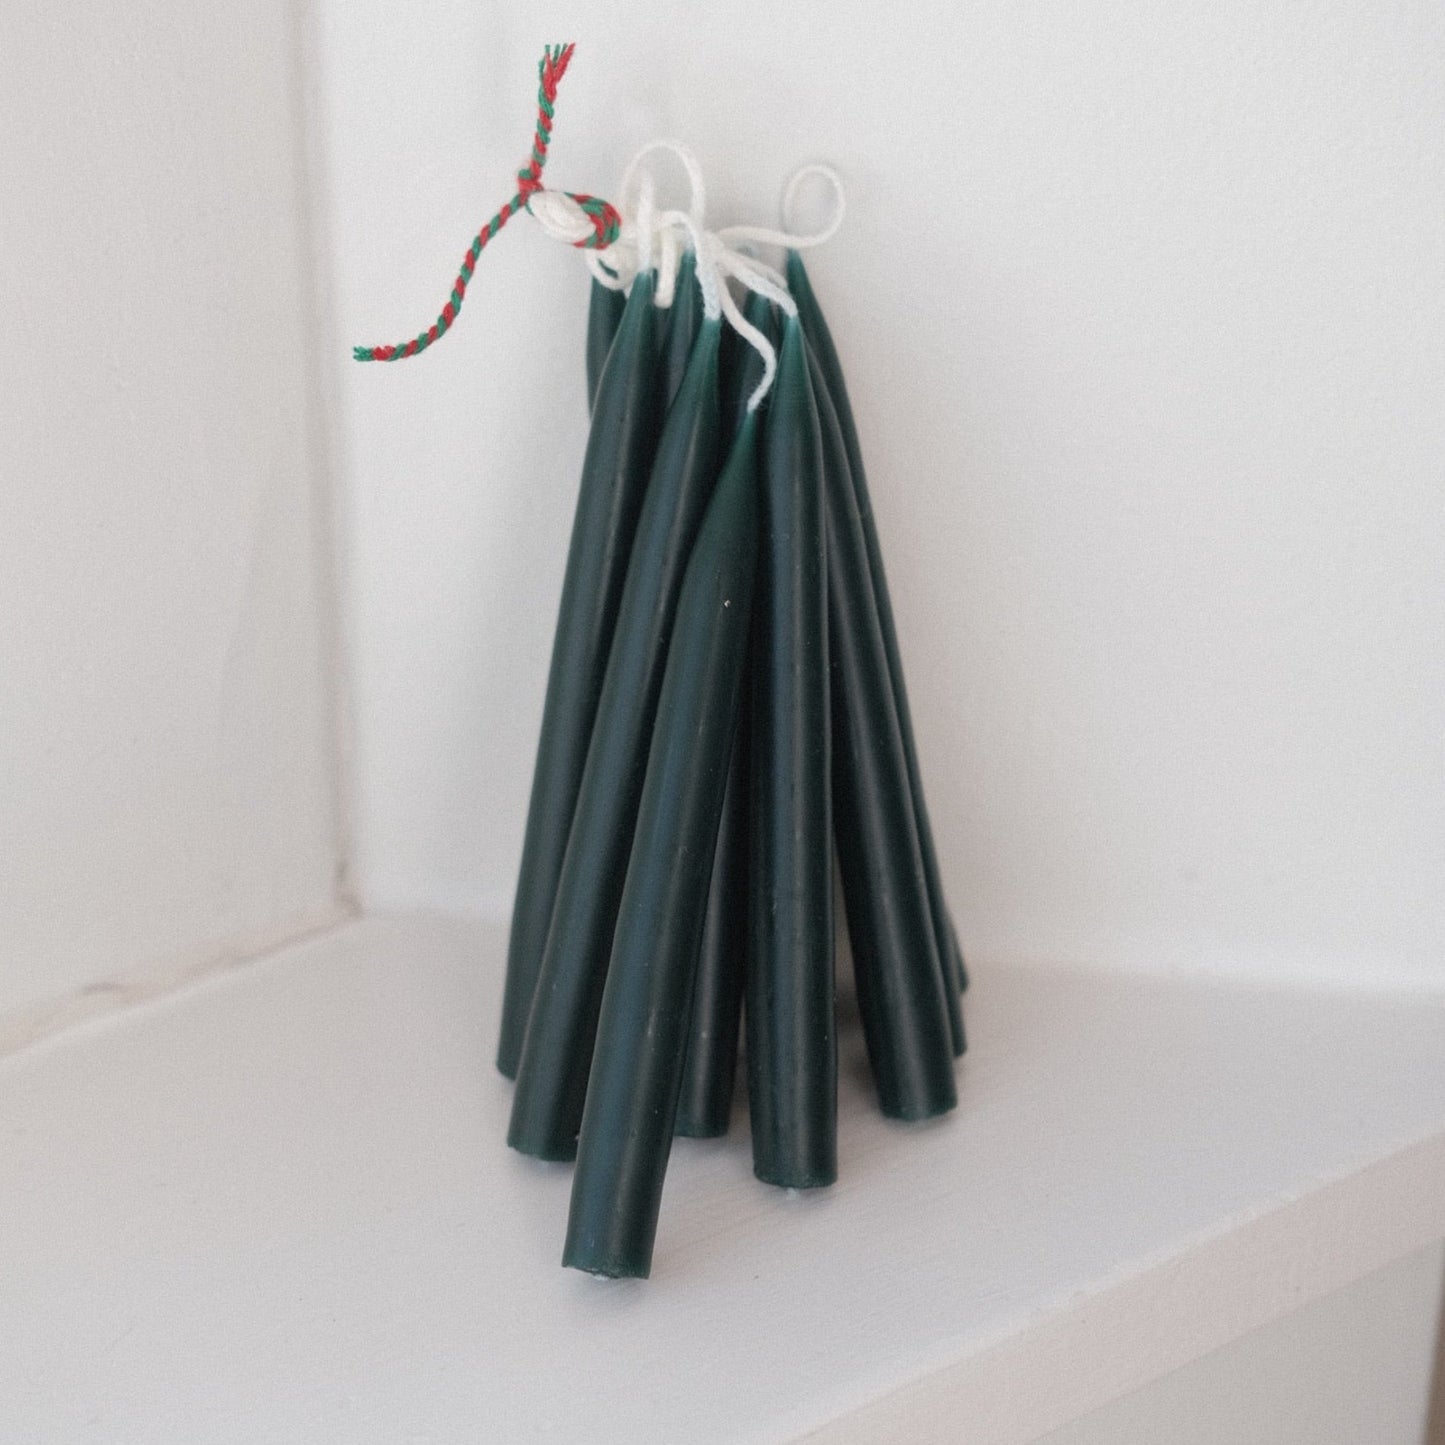 Hand-dipped candles • 12 cm • Forest green